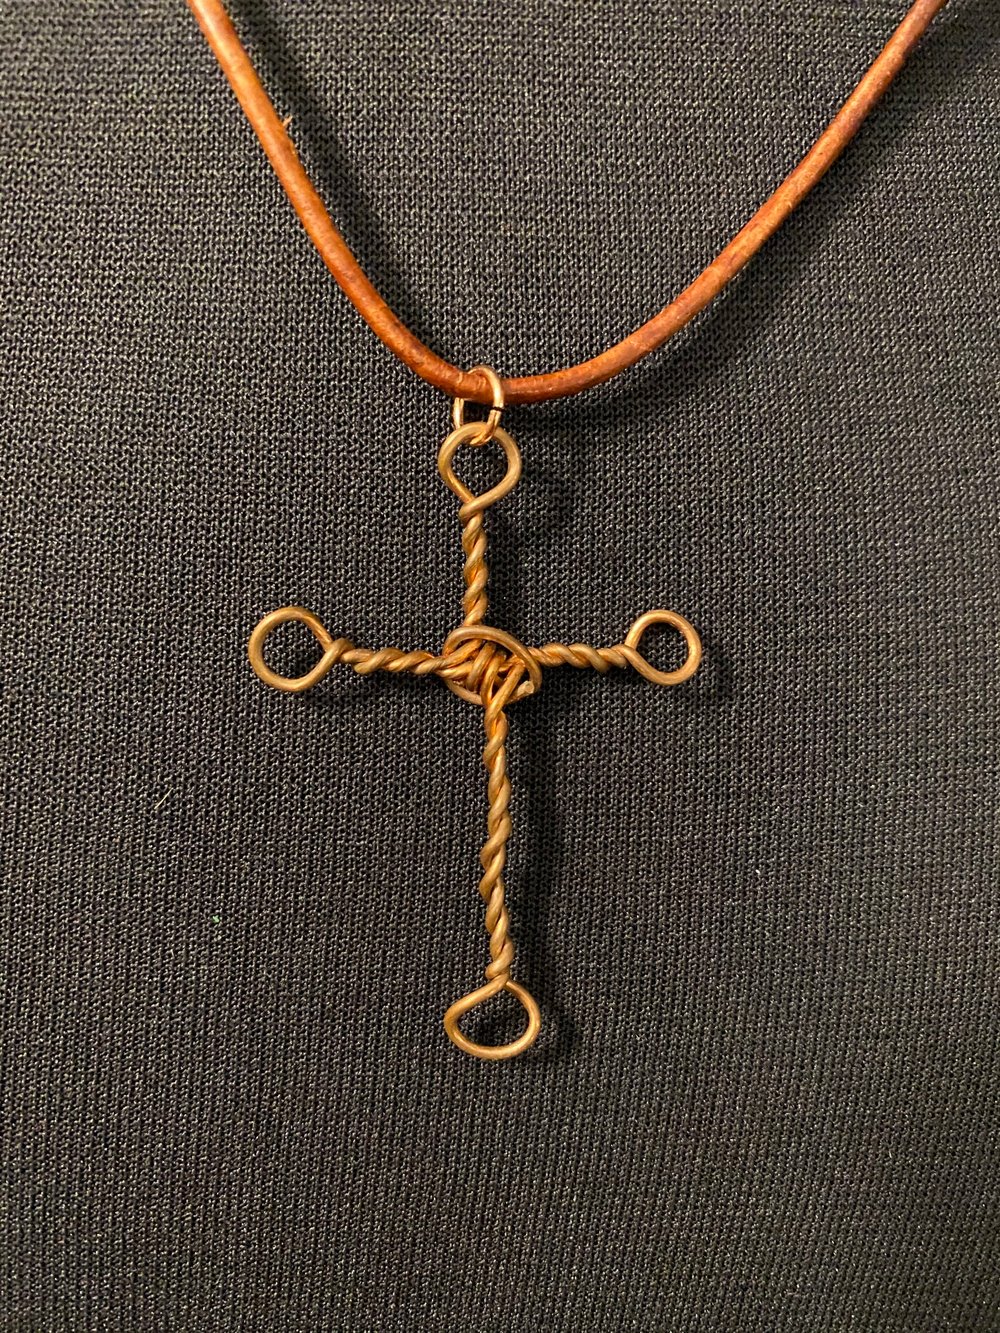 Copper Cross Leather Necklace